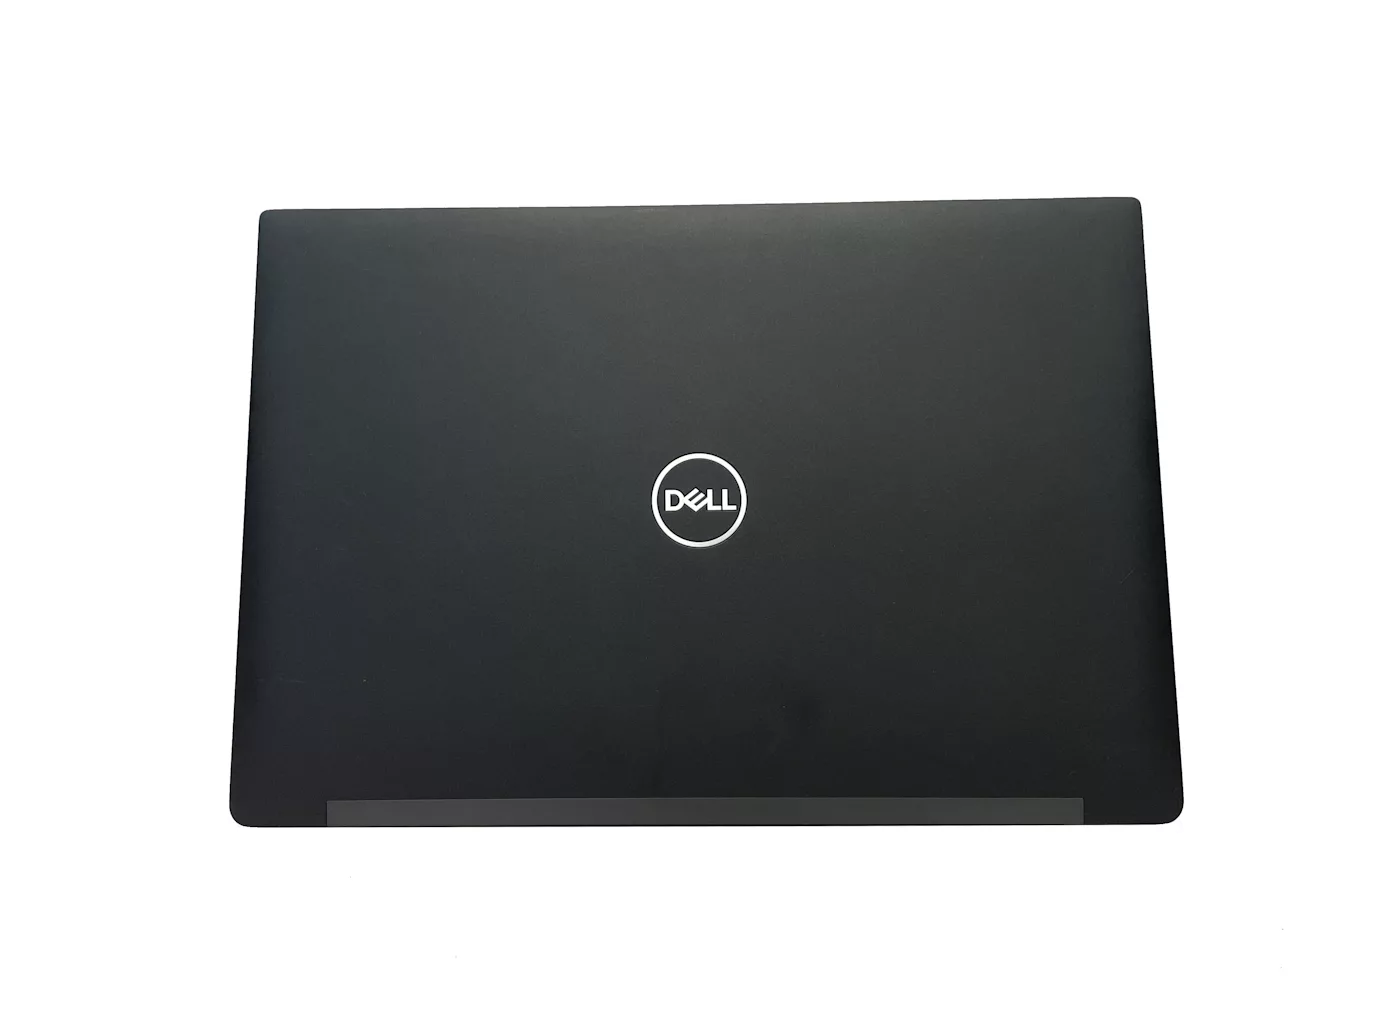 Photo showing Dell Latitude 7390 Top as shown on ATR Web Store